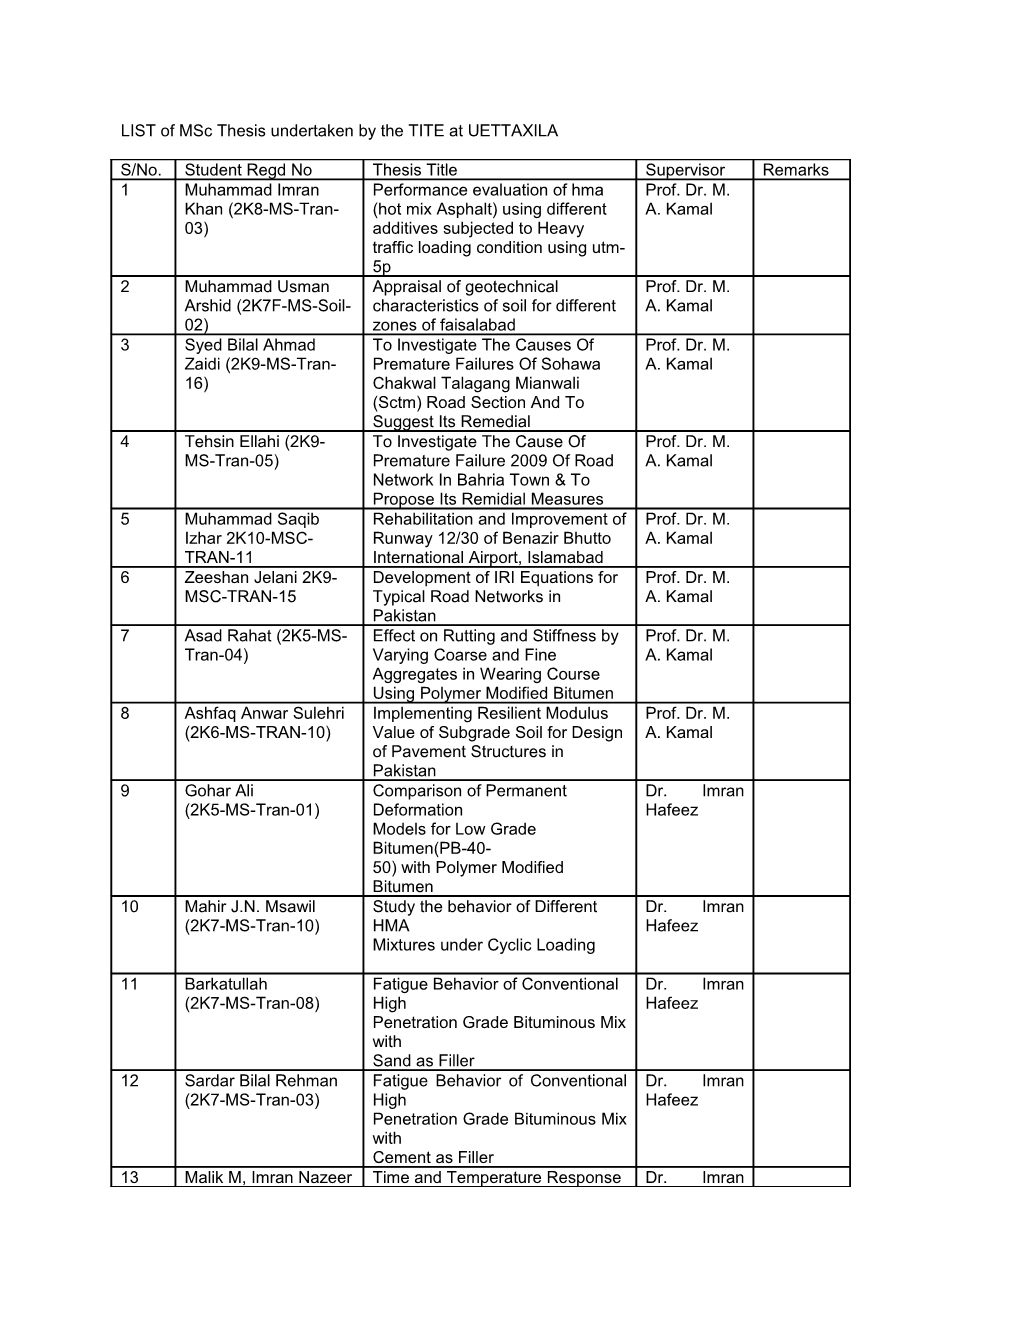 LIST of Msc Thesis Undertaken by the TITE at UETTAXILA